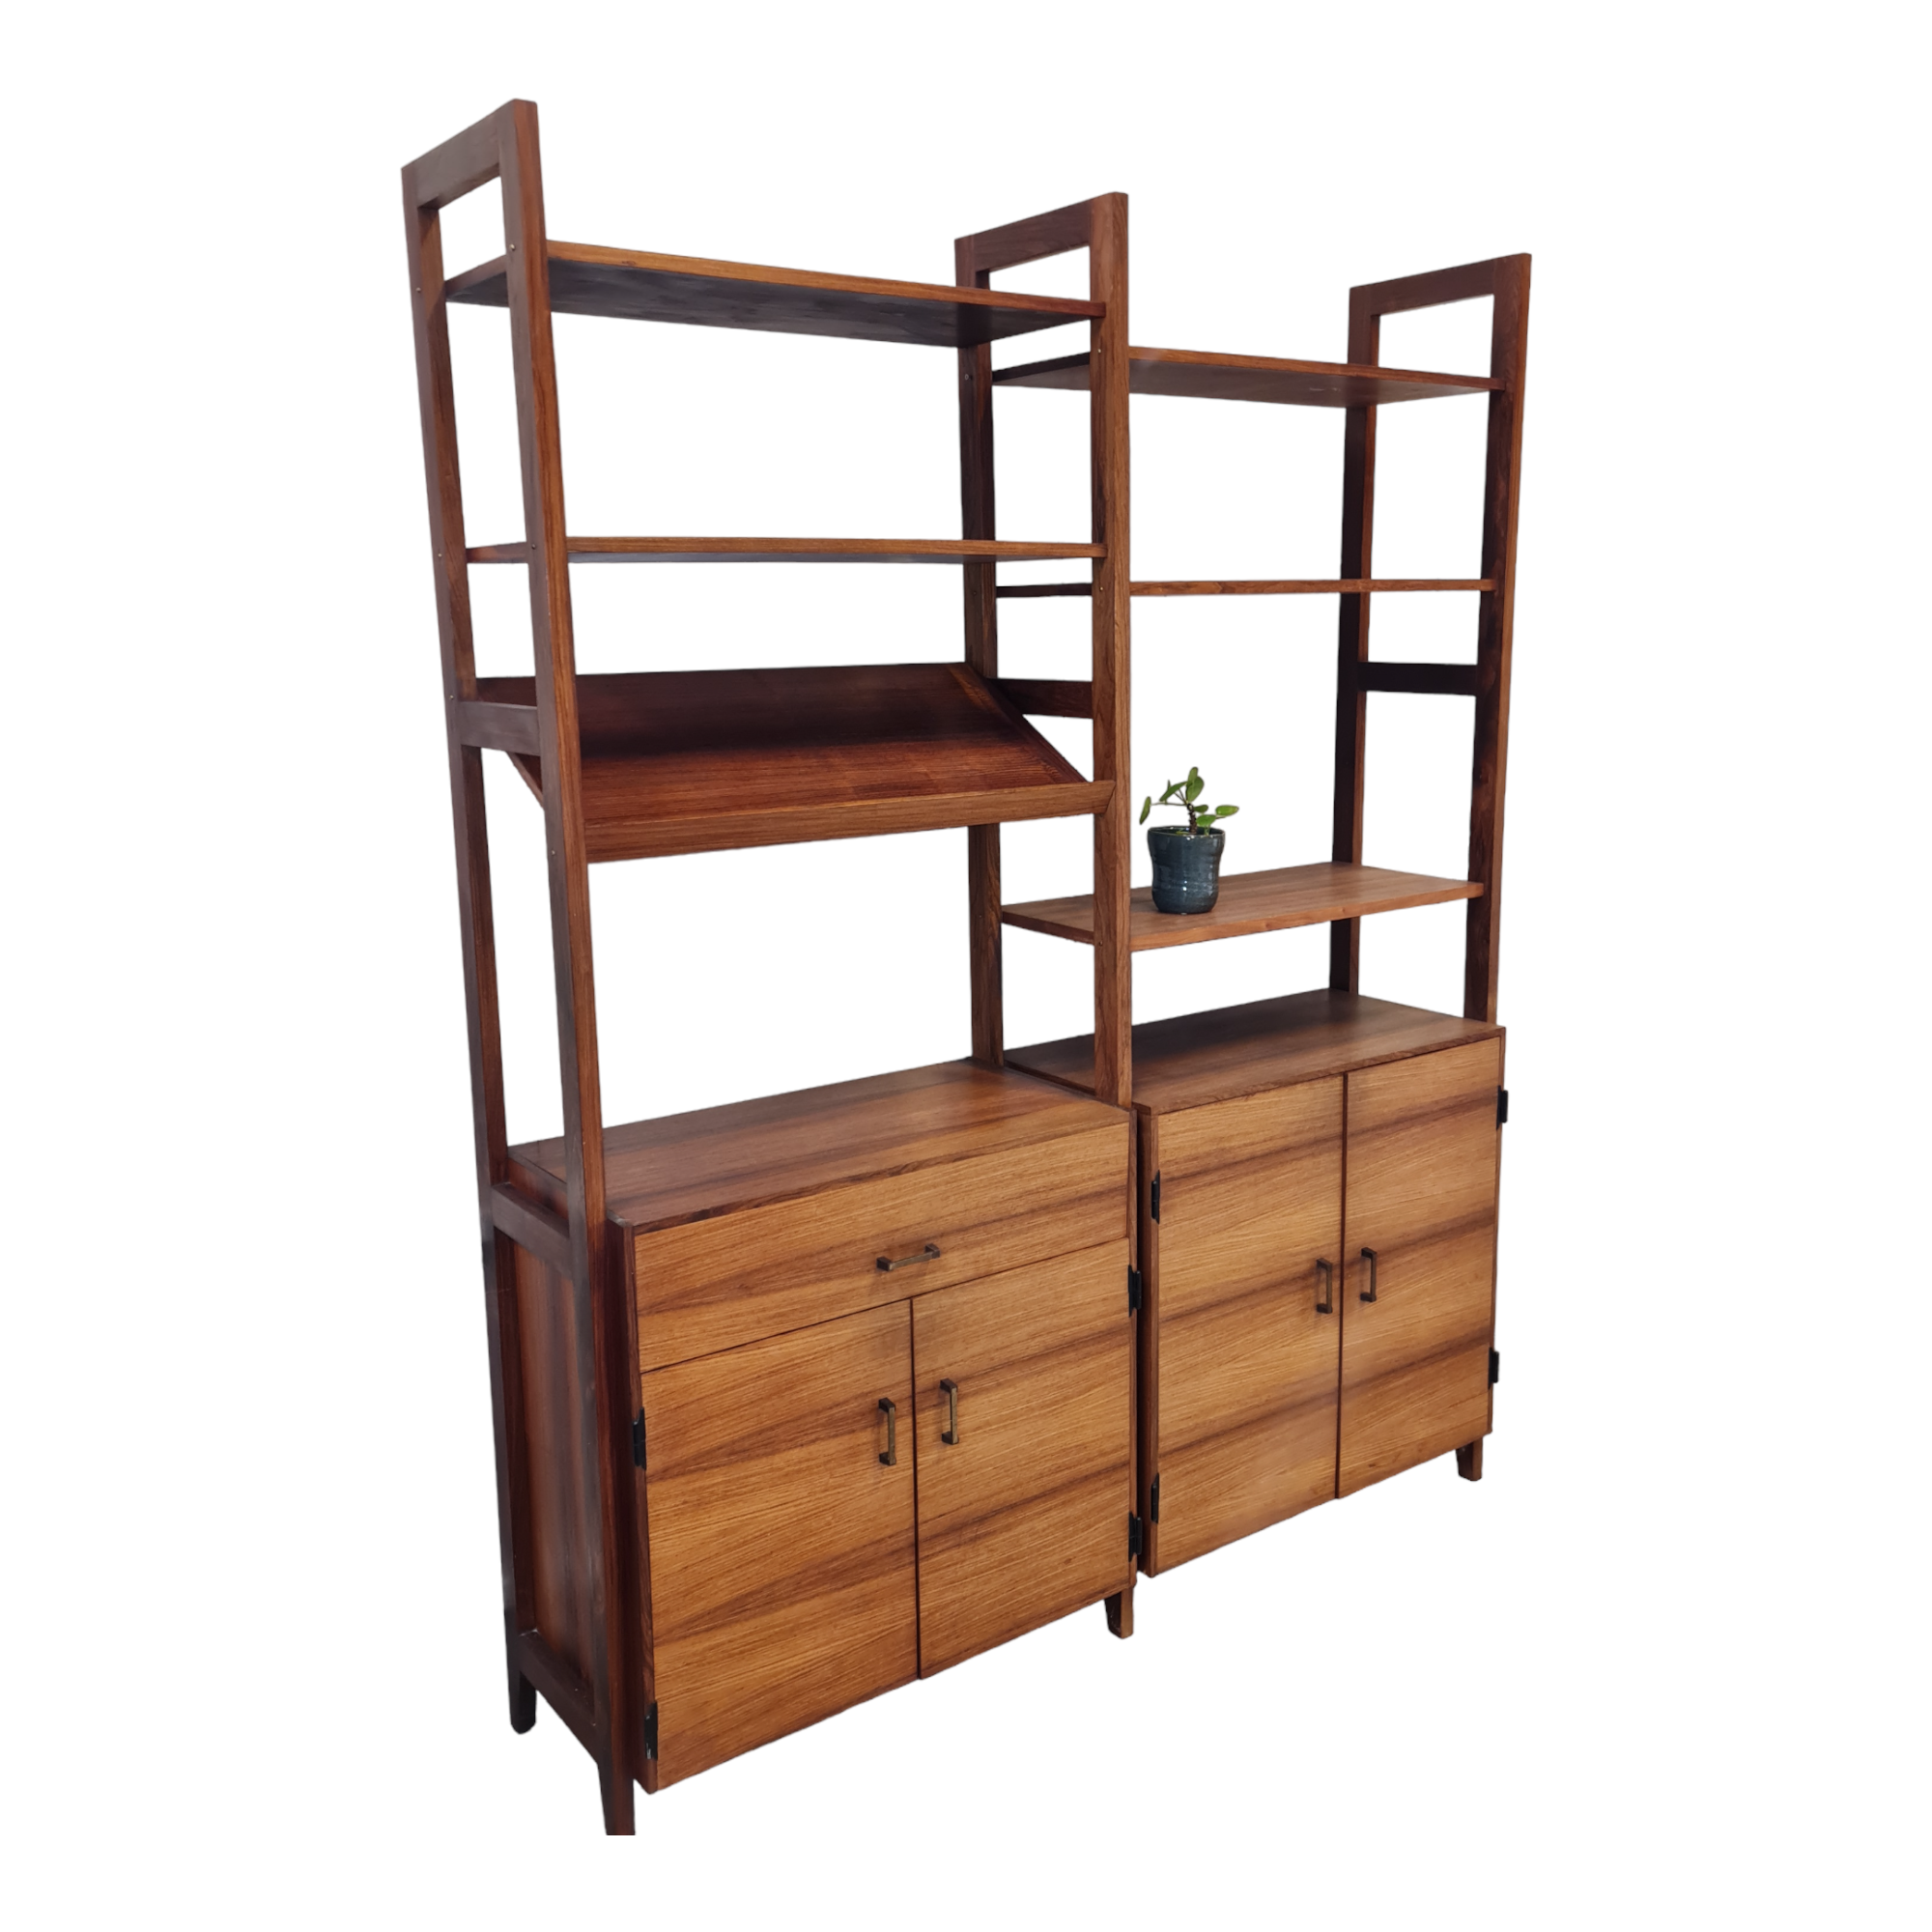 Two connected shelves | Rosewood | Danish furniture manufacturer